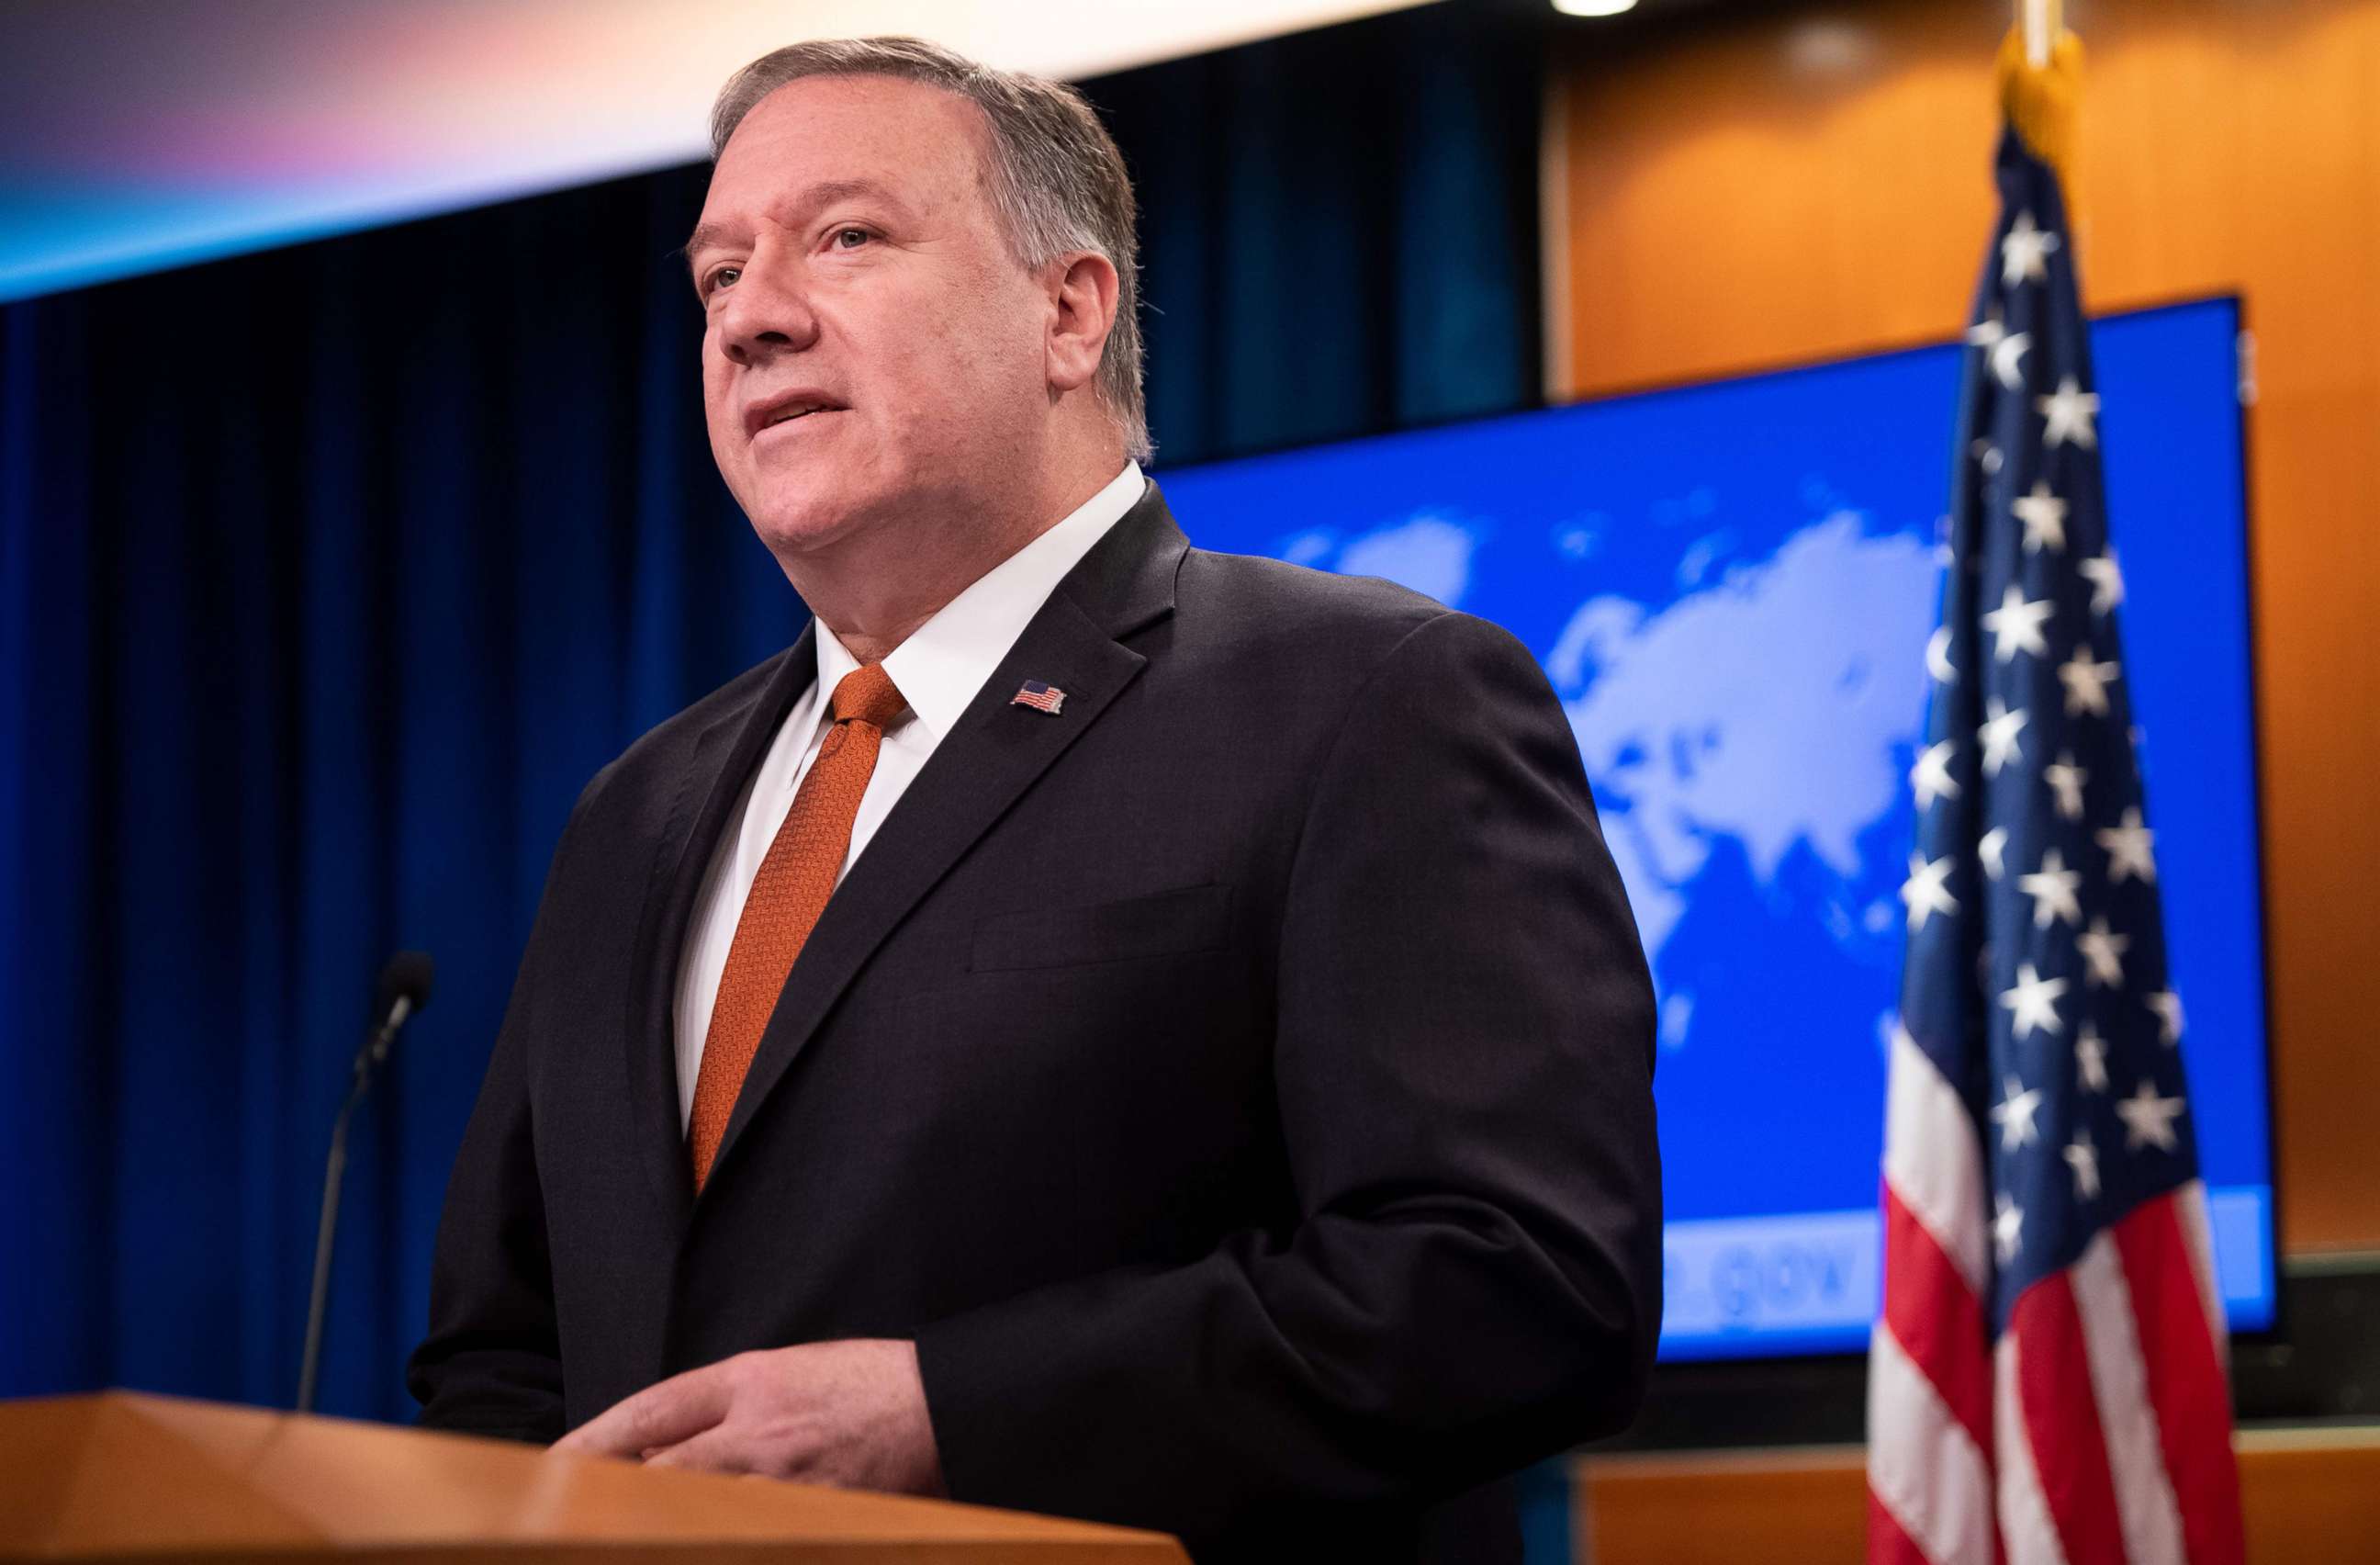 PHOTO: Secretary of State Mike Pompeo holds a press conference at the State Department in Washington, DC, Nov. 26, 2019.